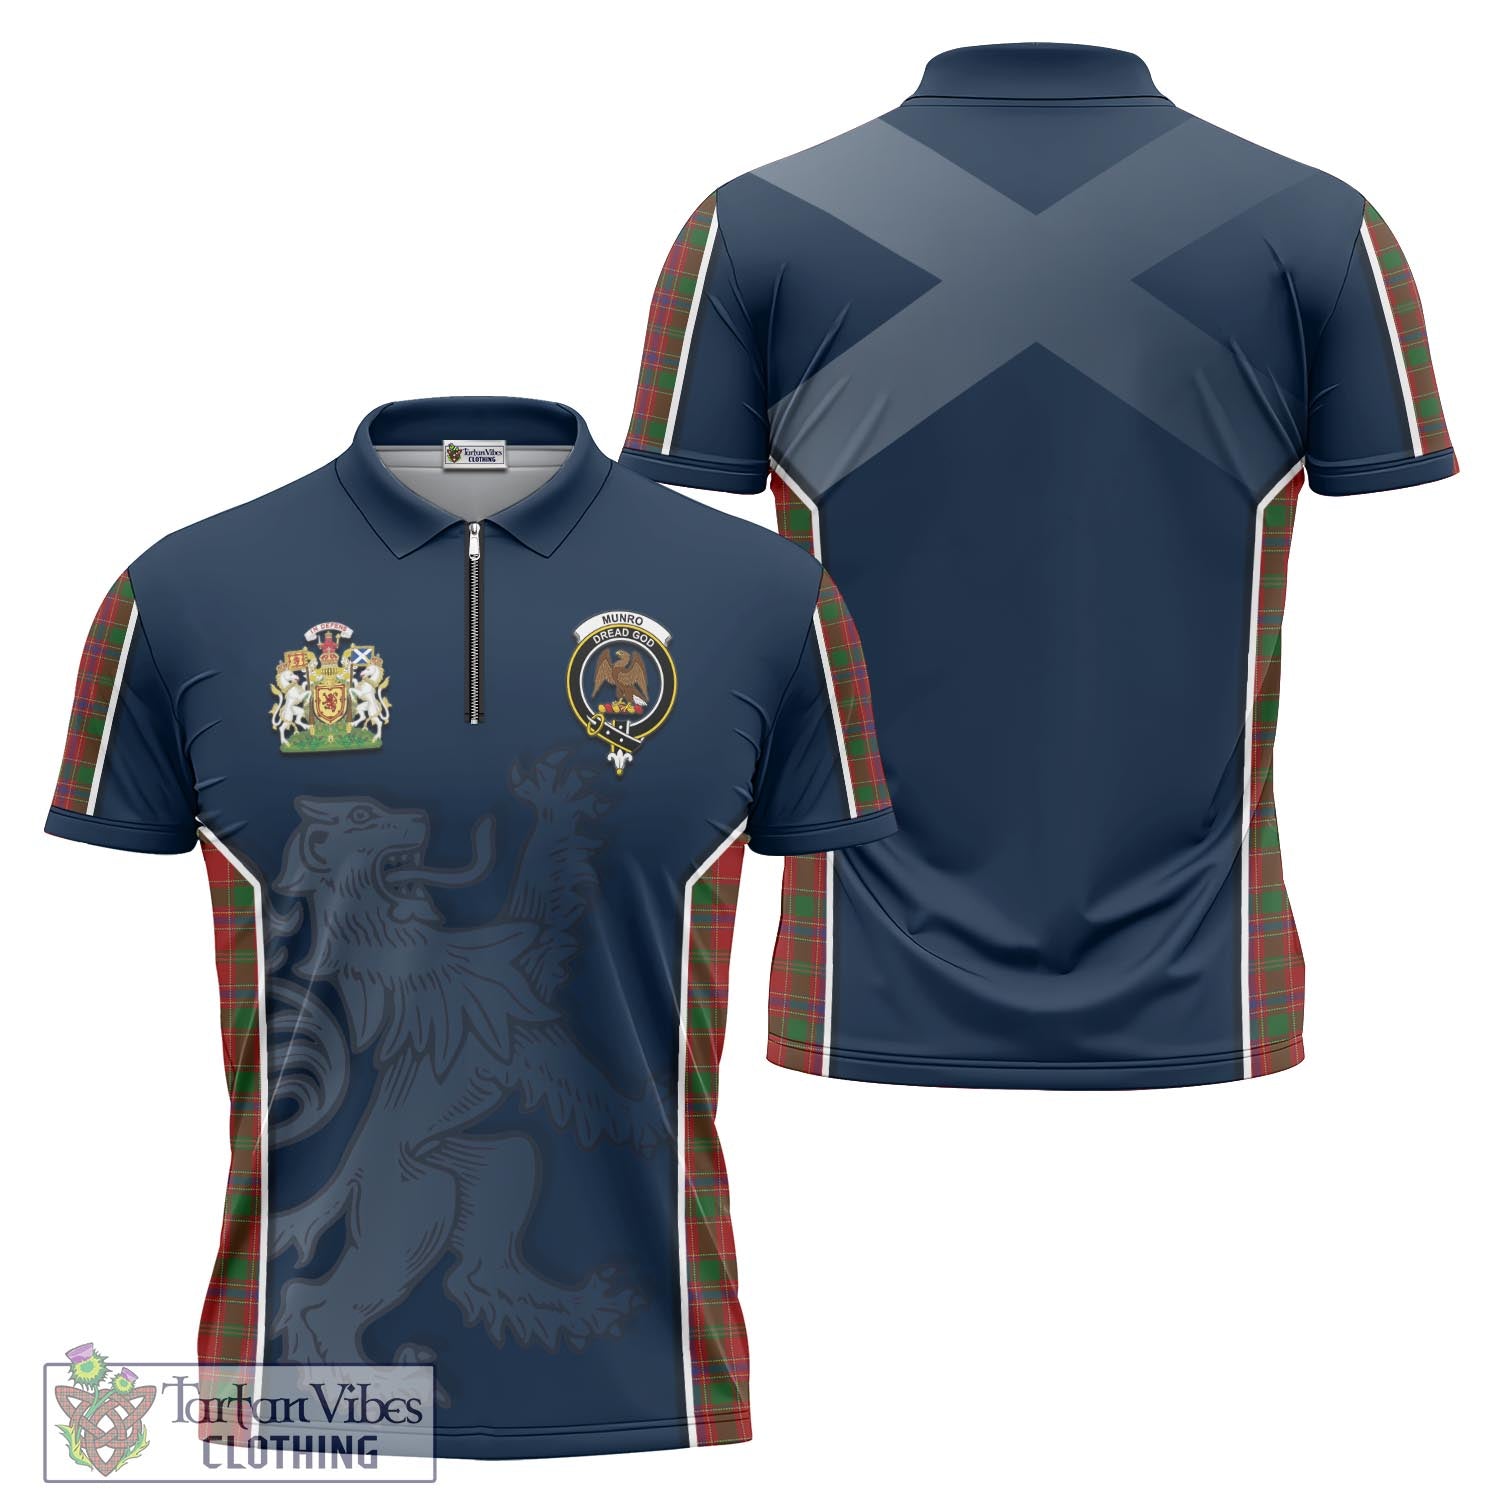 Tartan Vibes Clothing Munro Tartan Zipper Polo Shirt with Family Crest and Lion Rampant Vibes Sport Style